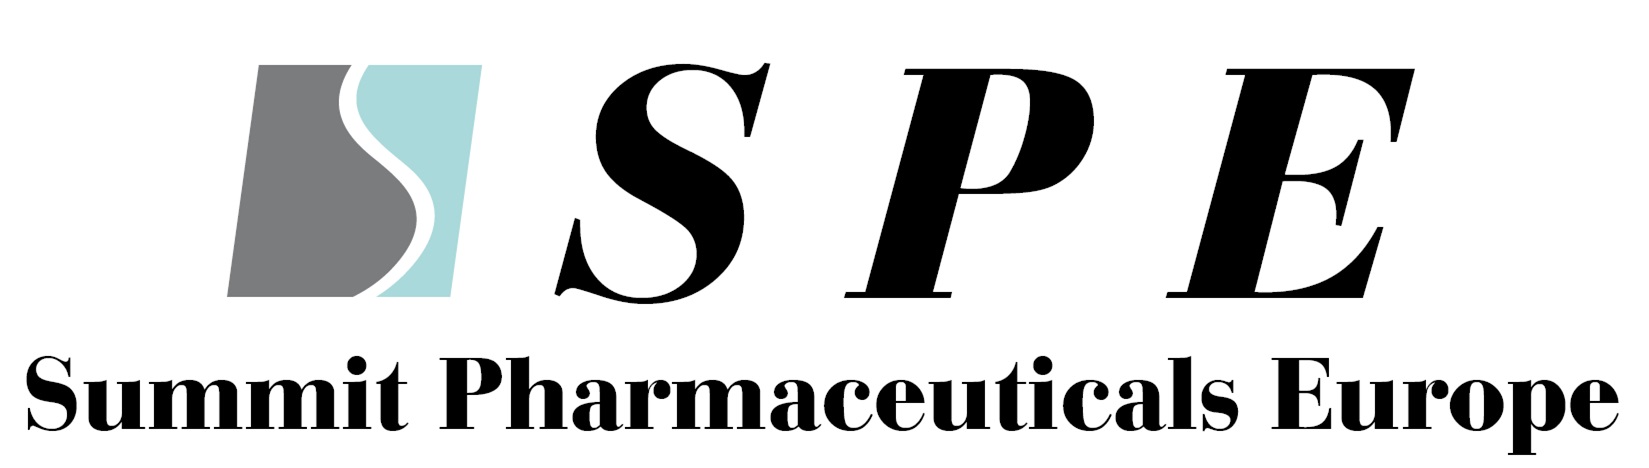 Logo for Summit Pharmaceuticals Europe S.r.l.